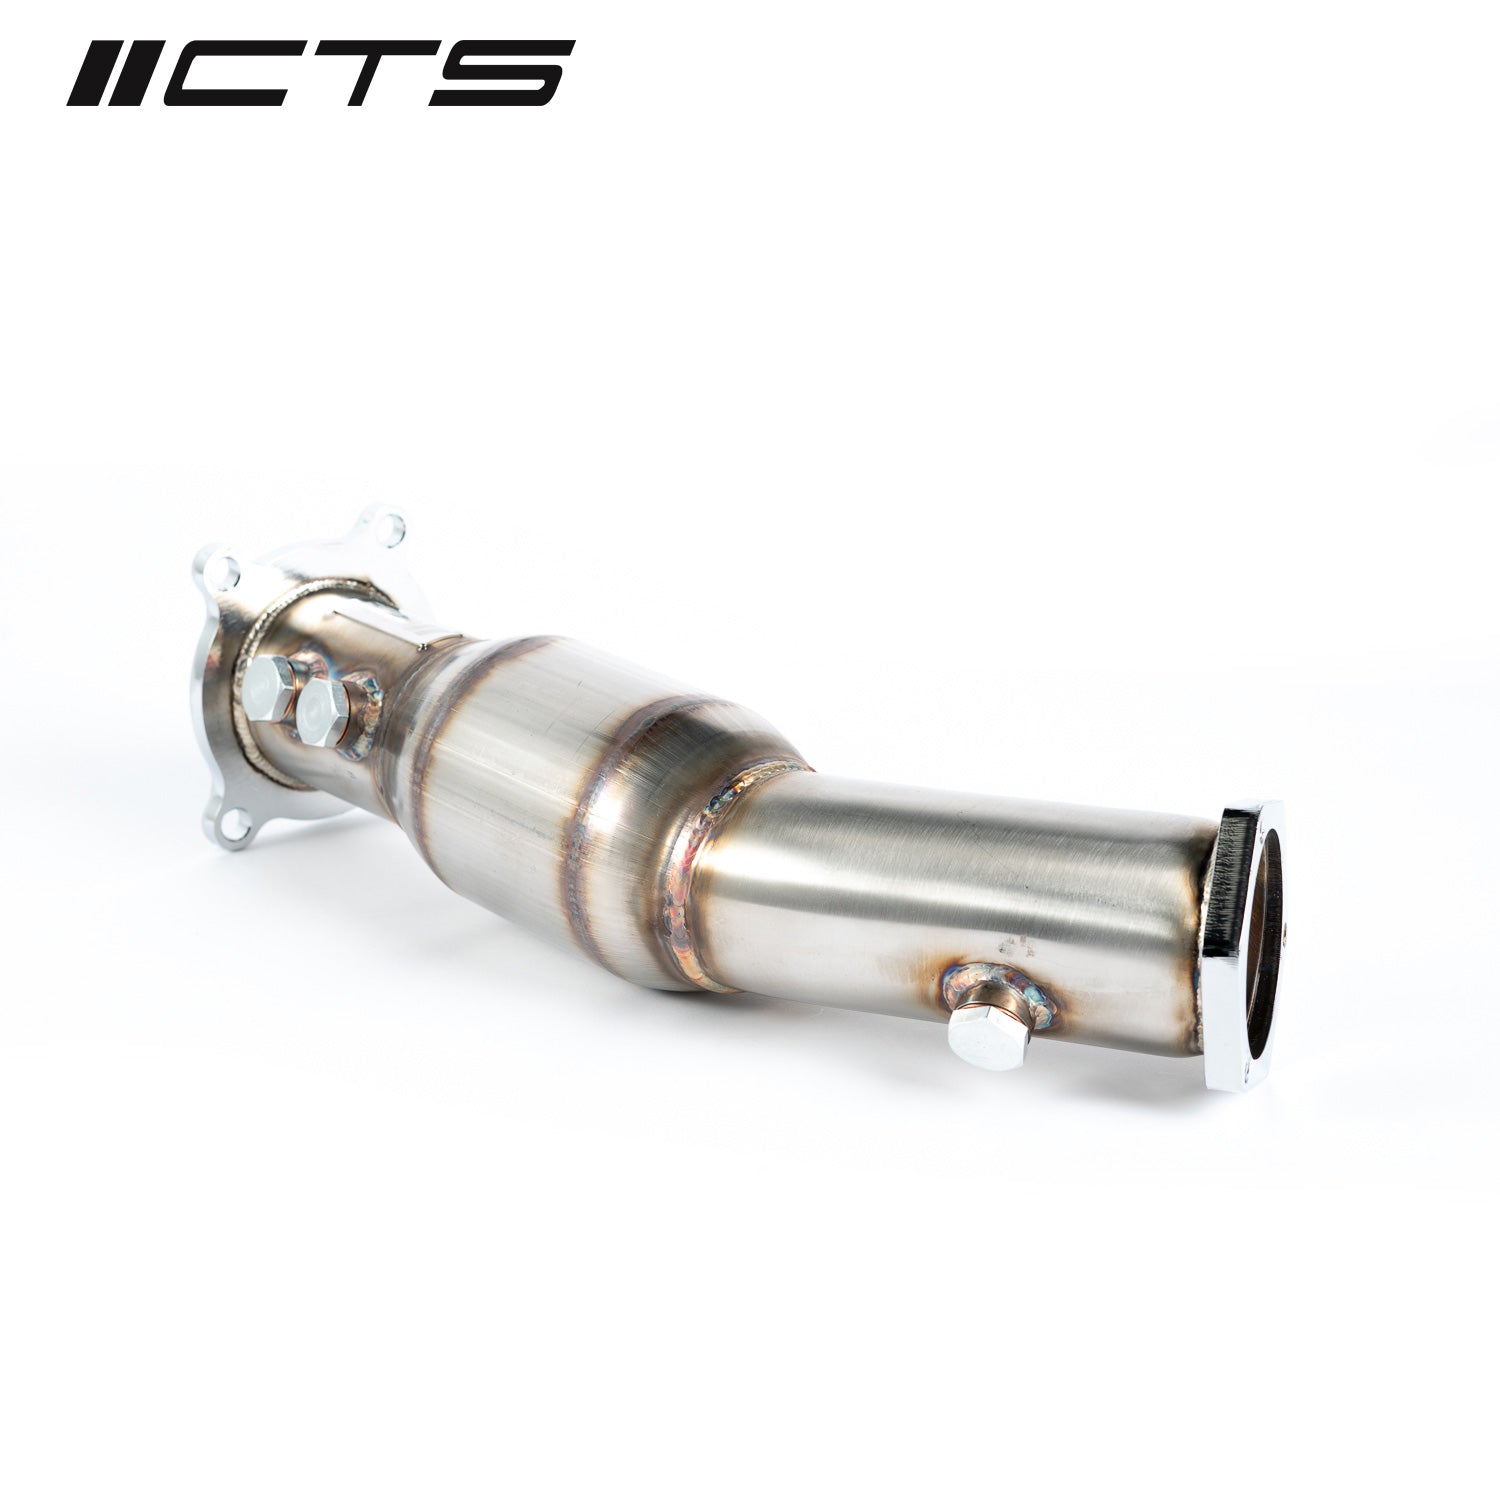 CTS TURBO B7 AUDI A4 2.0T HIGH FLOW CAT PIPE